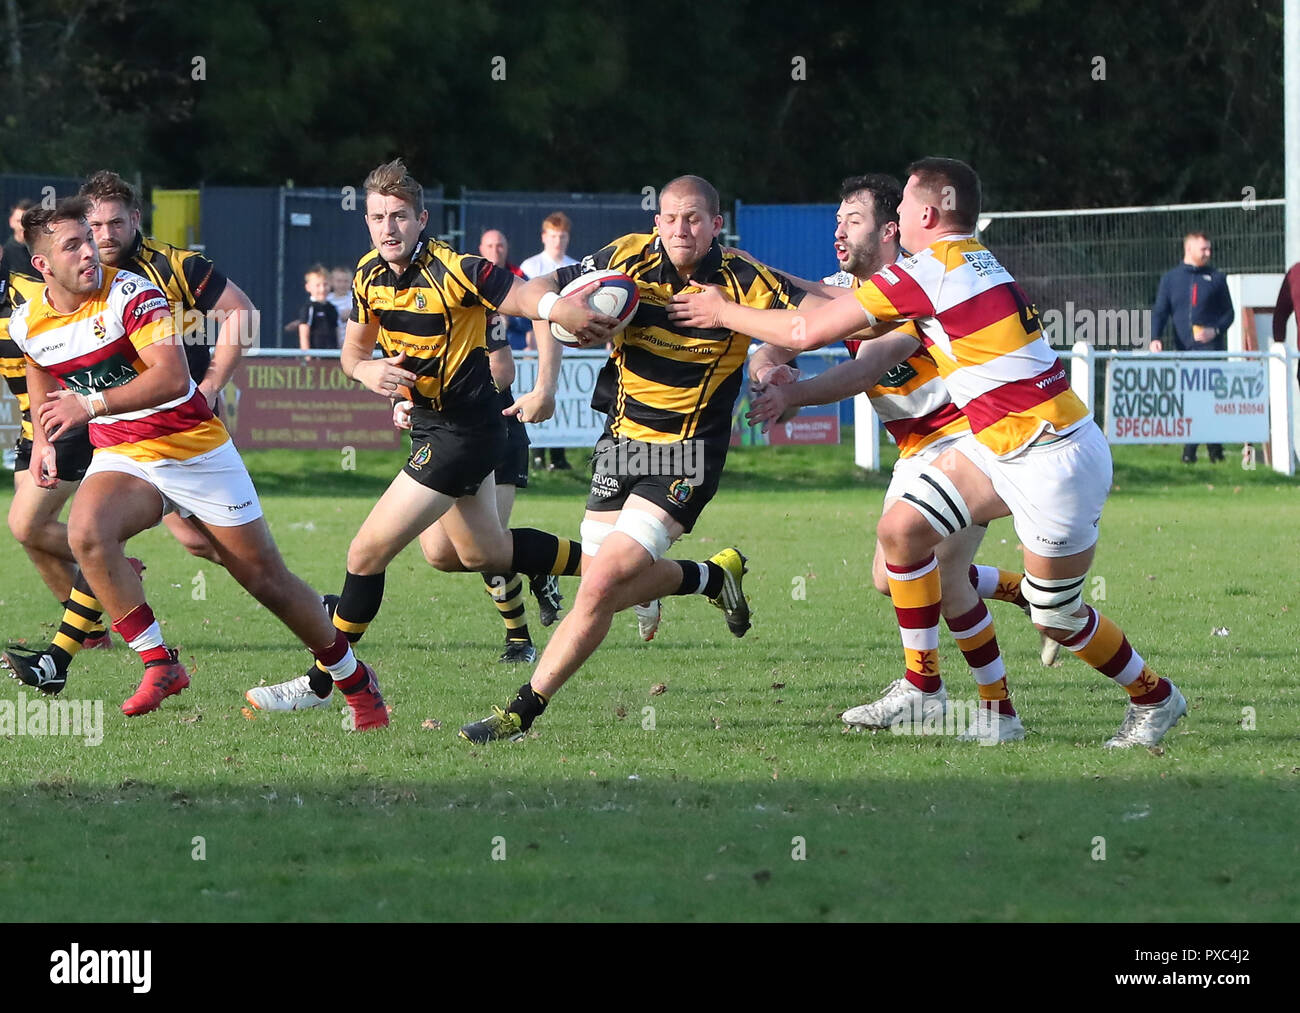 20.10.2018 Hinckley, Leicester, England. Rugby Union, Hinckley rfc v Fylde rfc.  Gareth Turner on the charge for Hinckley during the RFU National League 2 North (NL2N) game played at the Leicester  Road Stadium.    © Phil Hutchinson / Alamy Live News Stock Photo